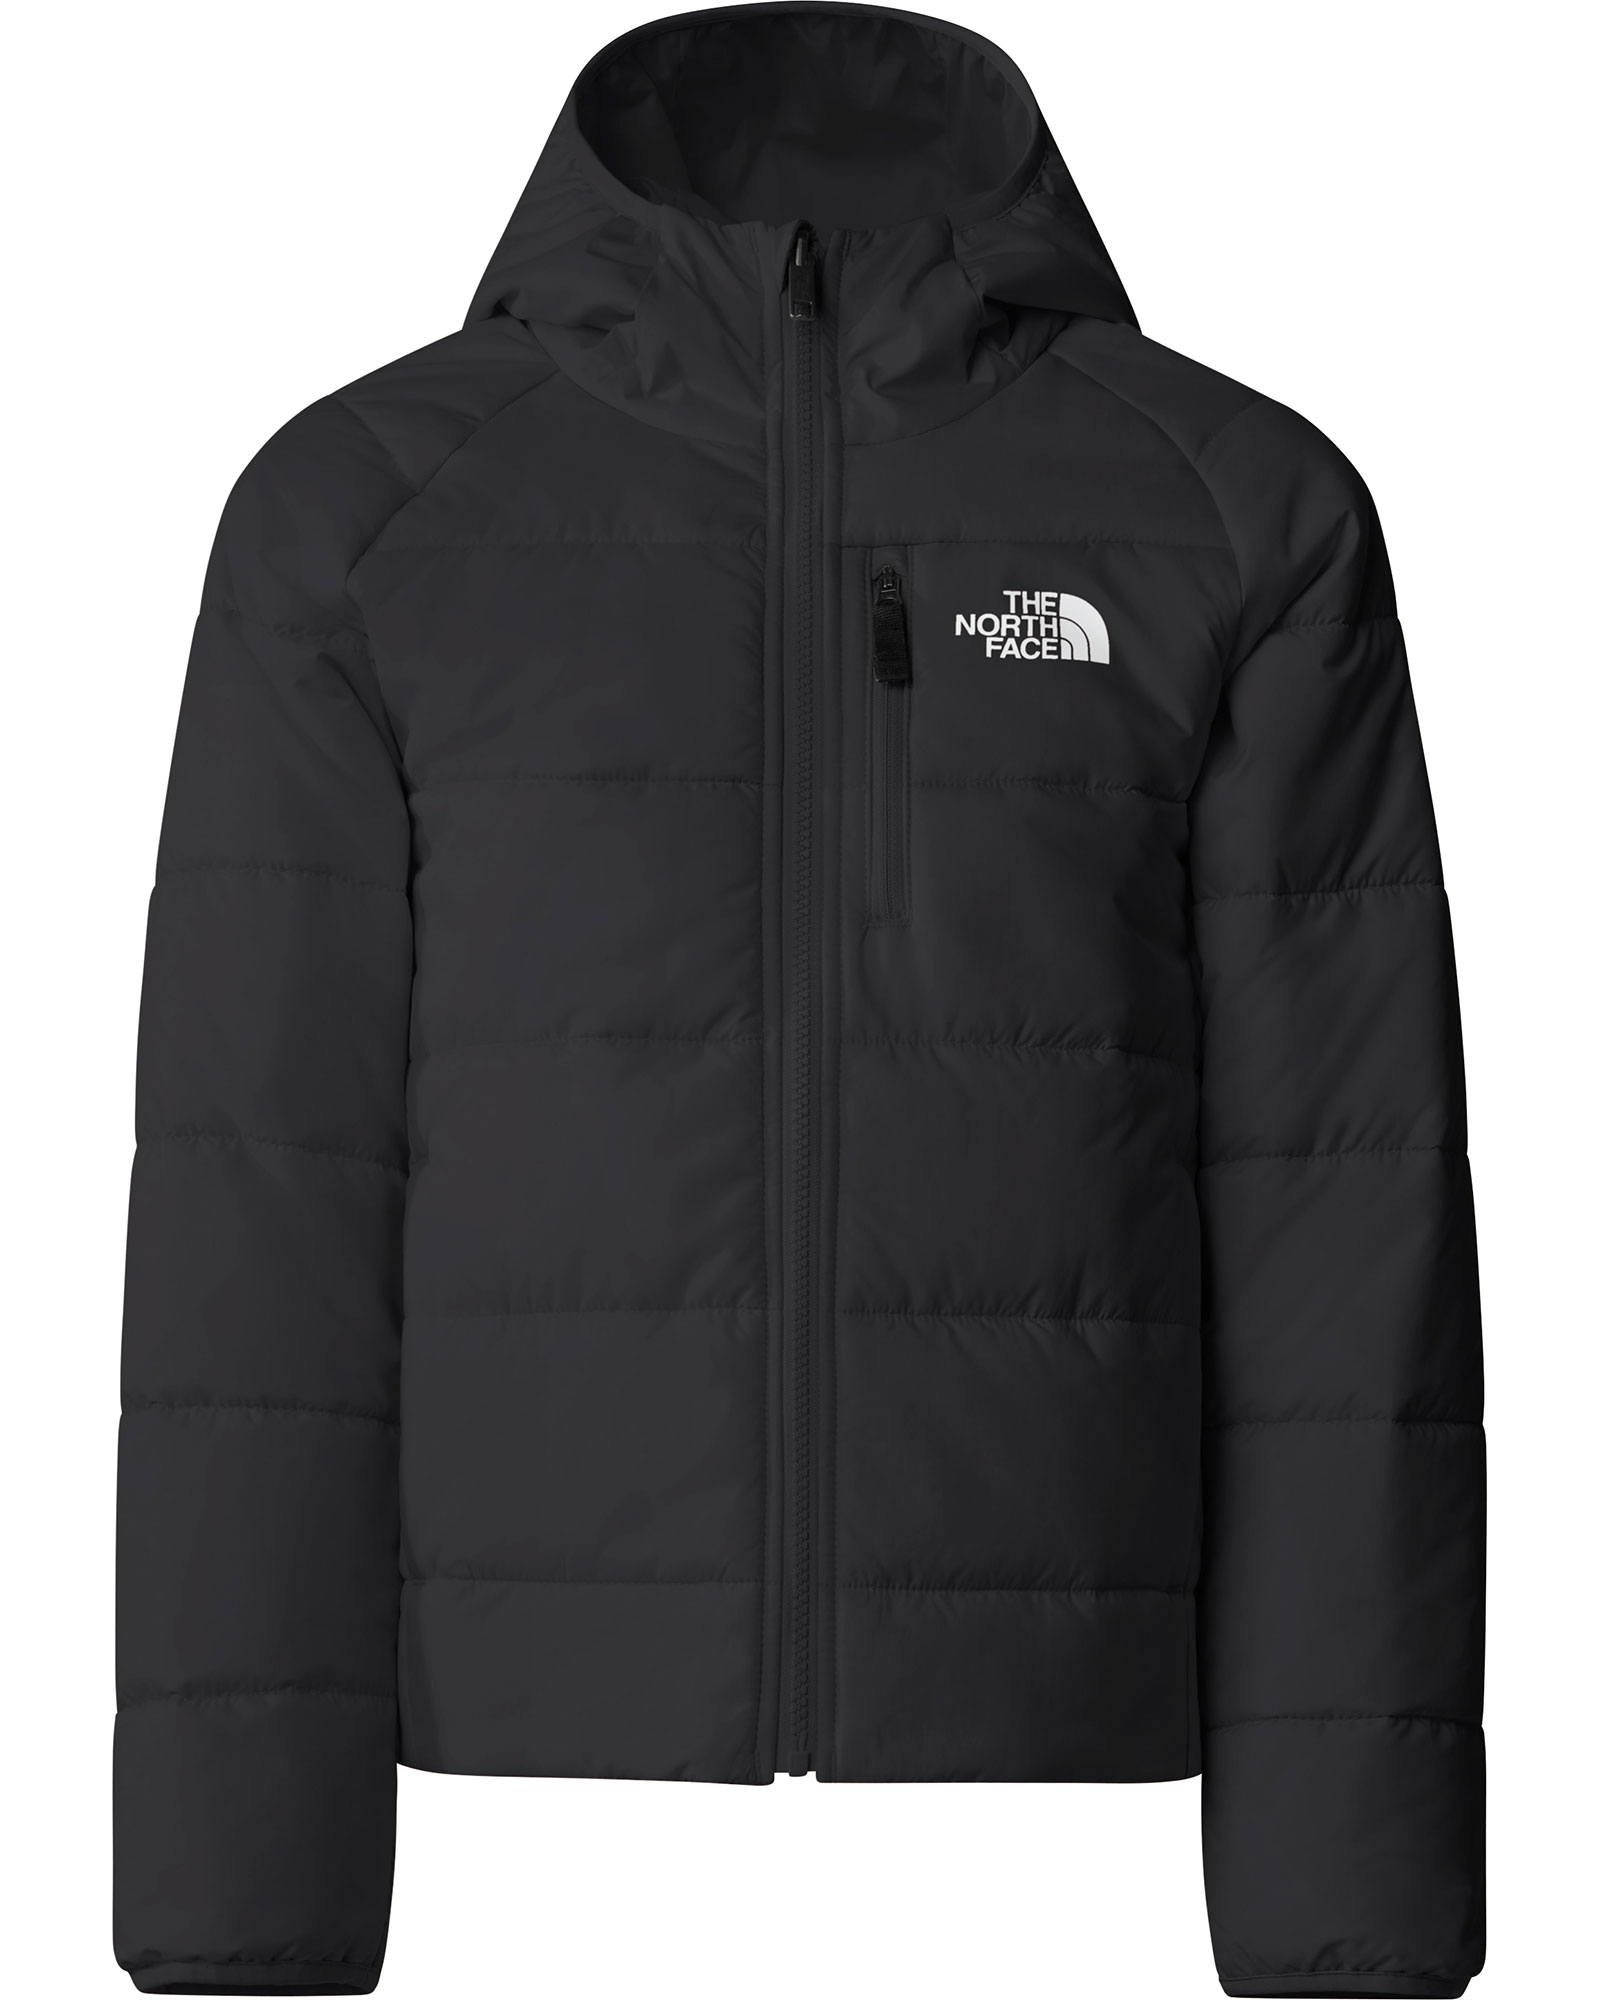 Product image of The North Face Girl's Reversible Perrito Jacket